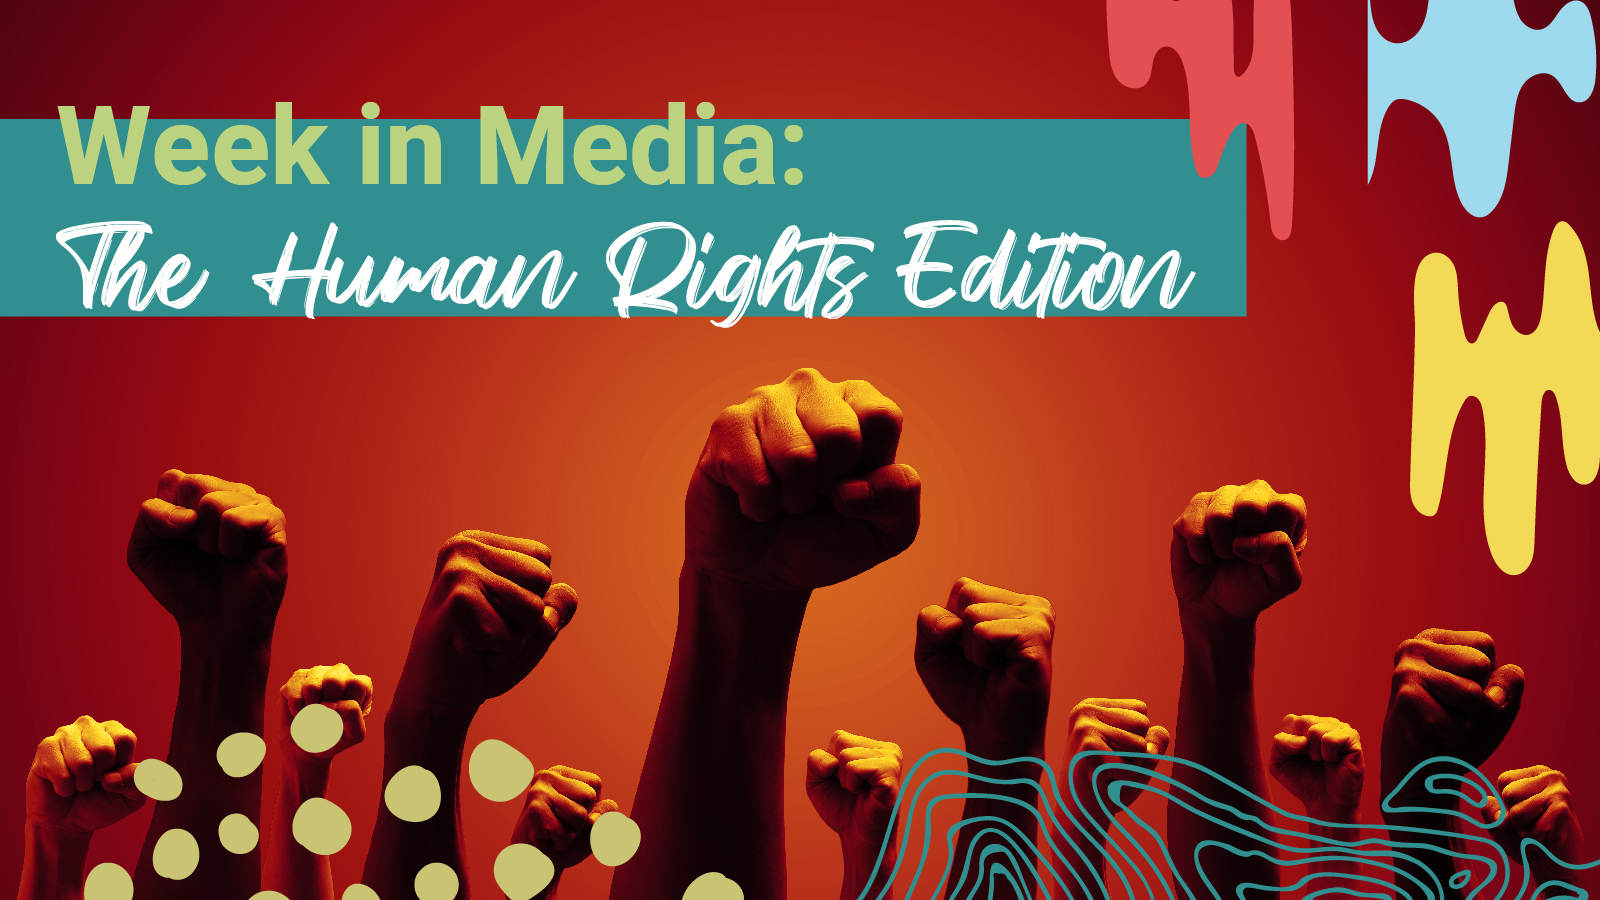 Week in Media: The Human Rights Edition